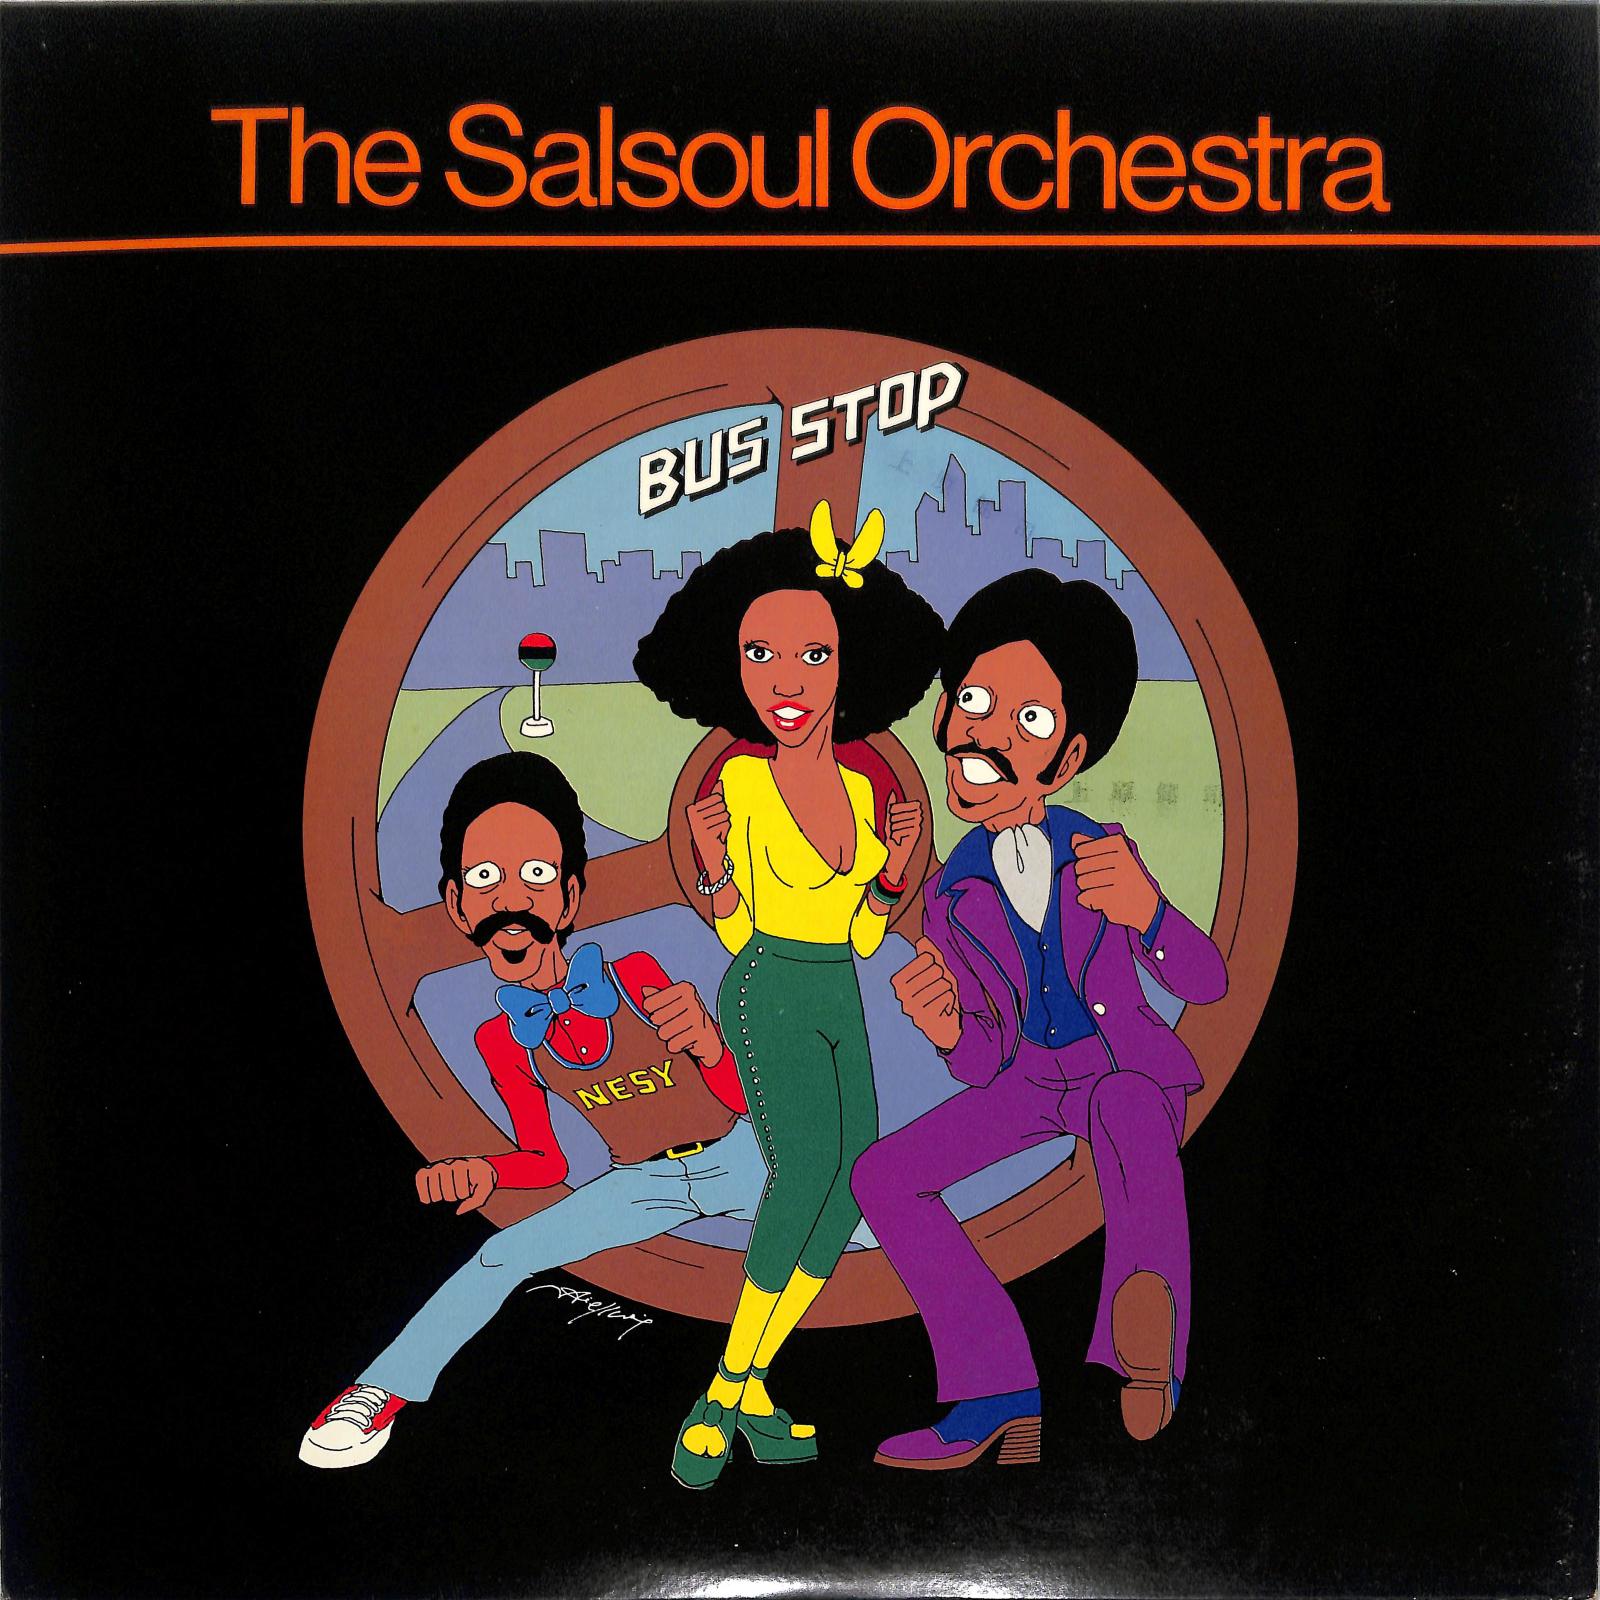 THE SALSOUL ORCHESTRA - Salsoul Orchestra